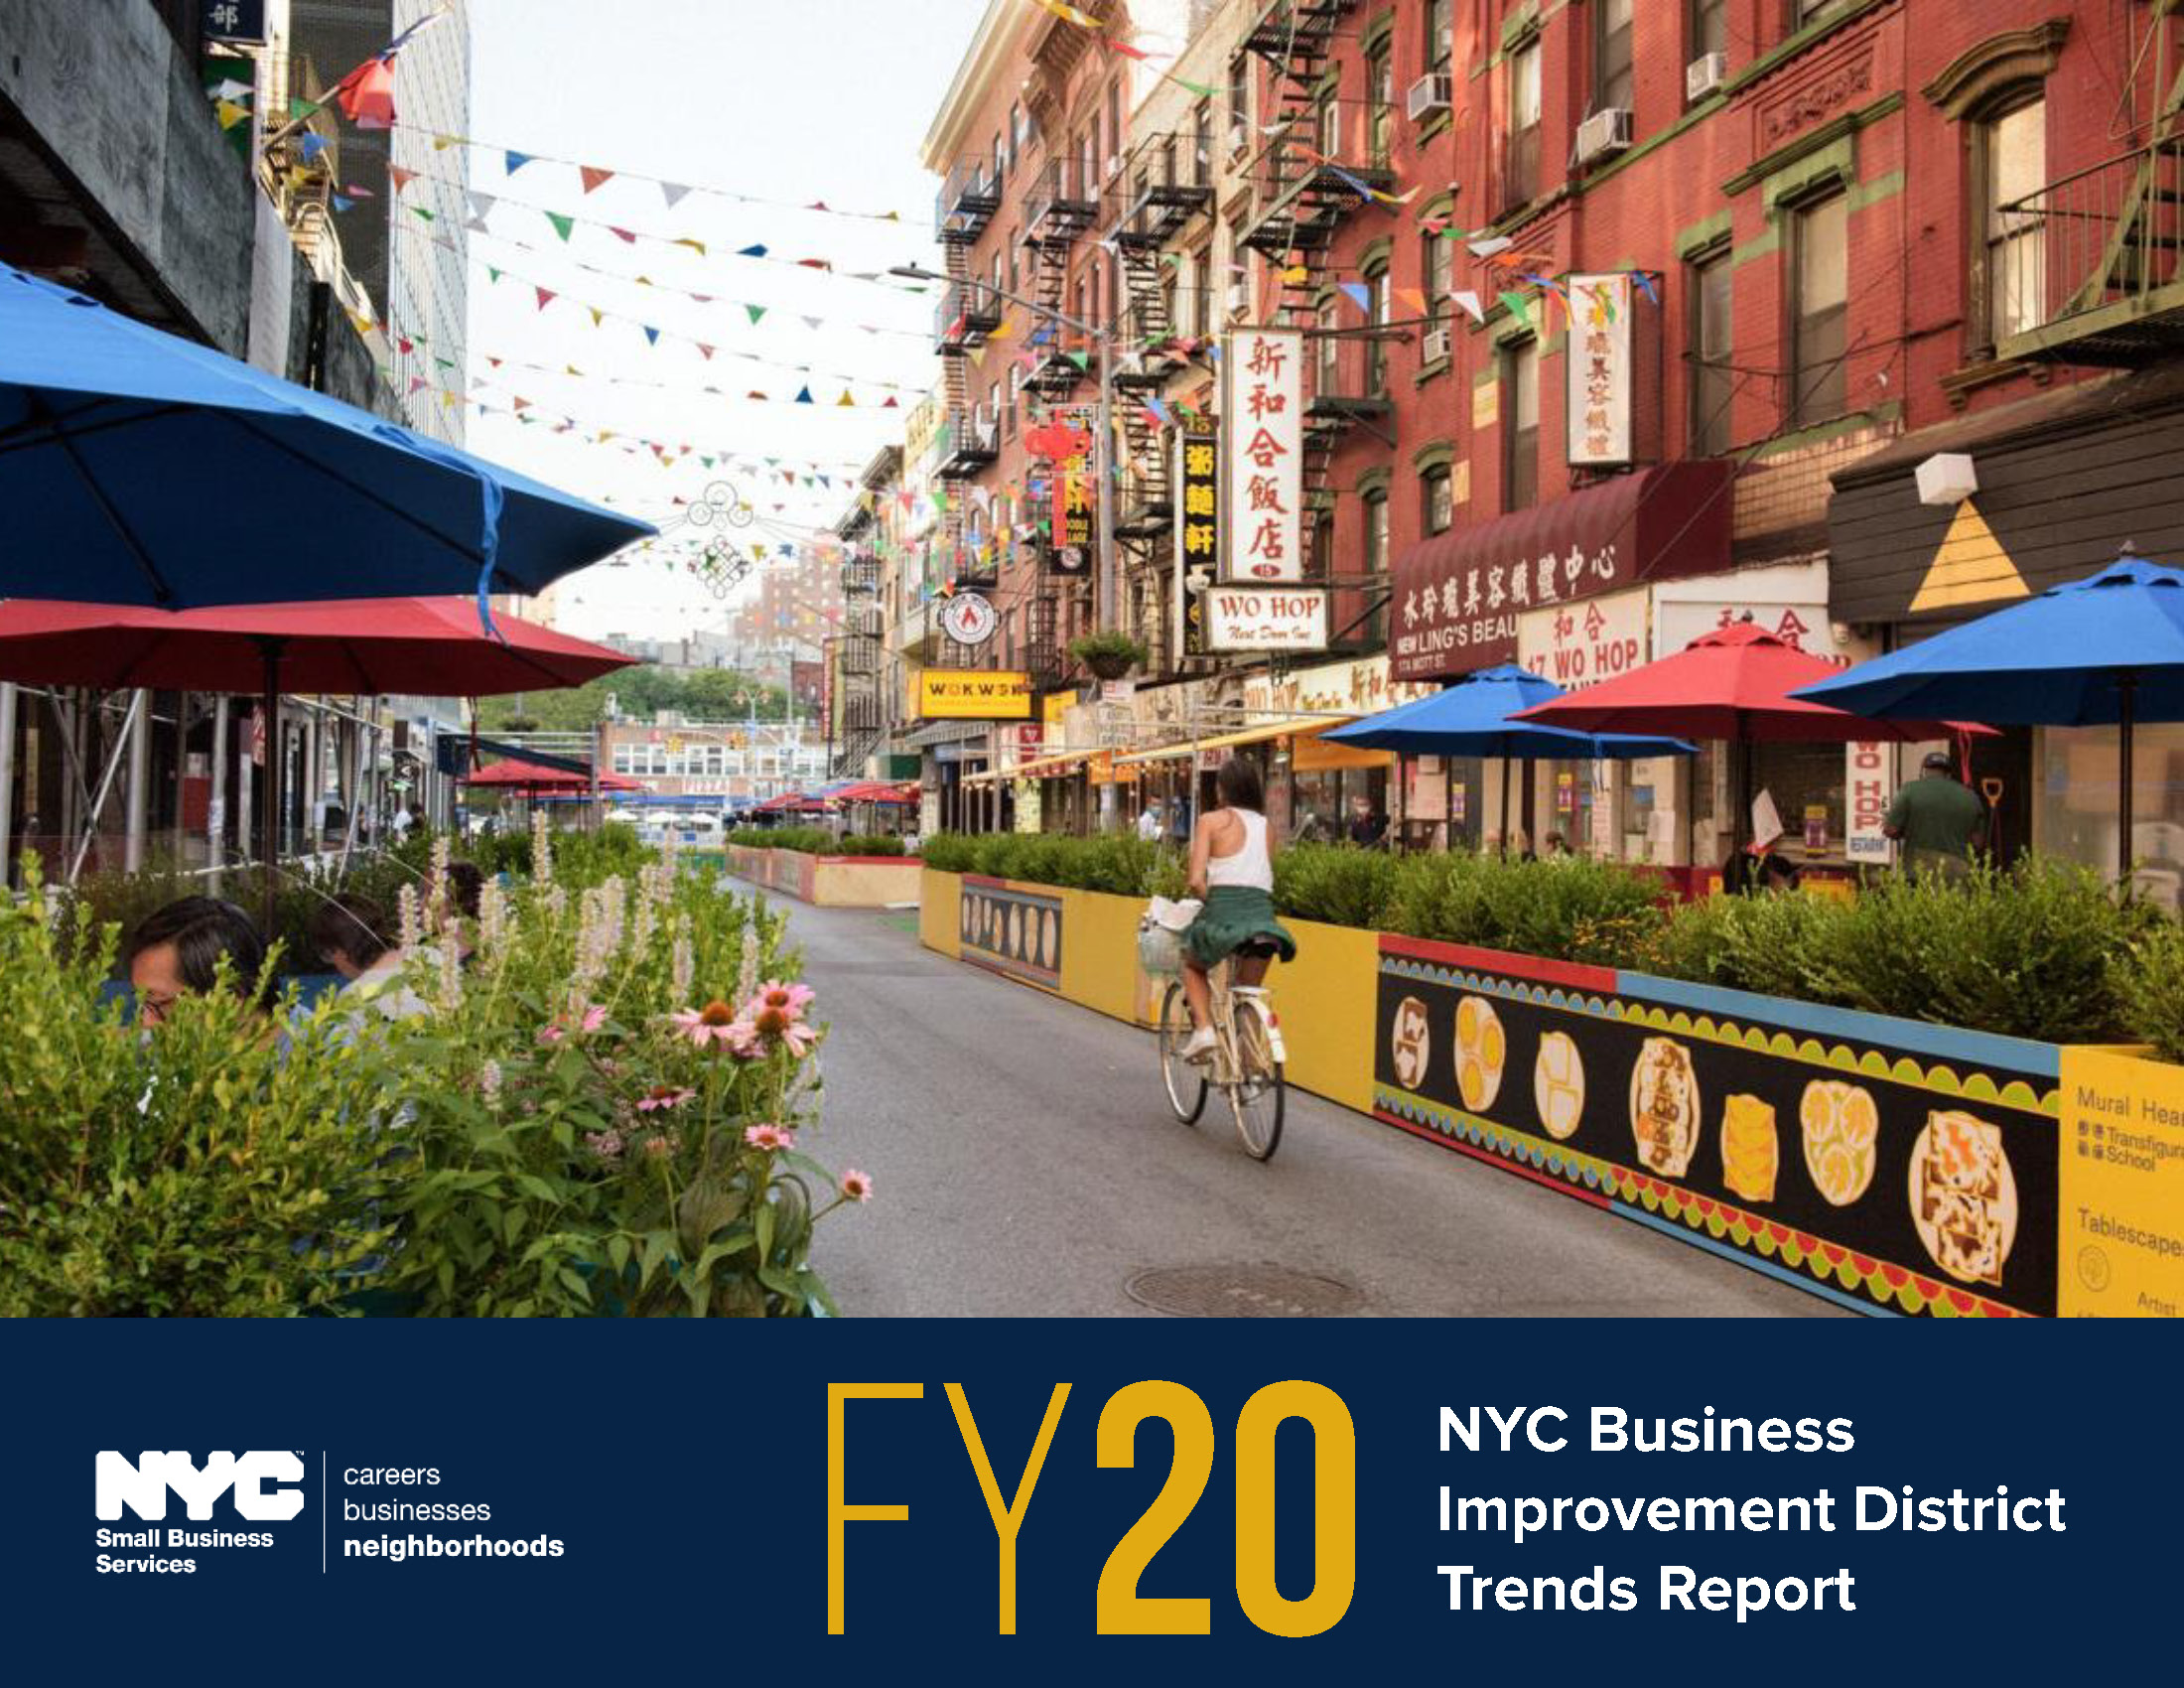 NYC Business Improvement District Trends Report: Fiscal Year 2020